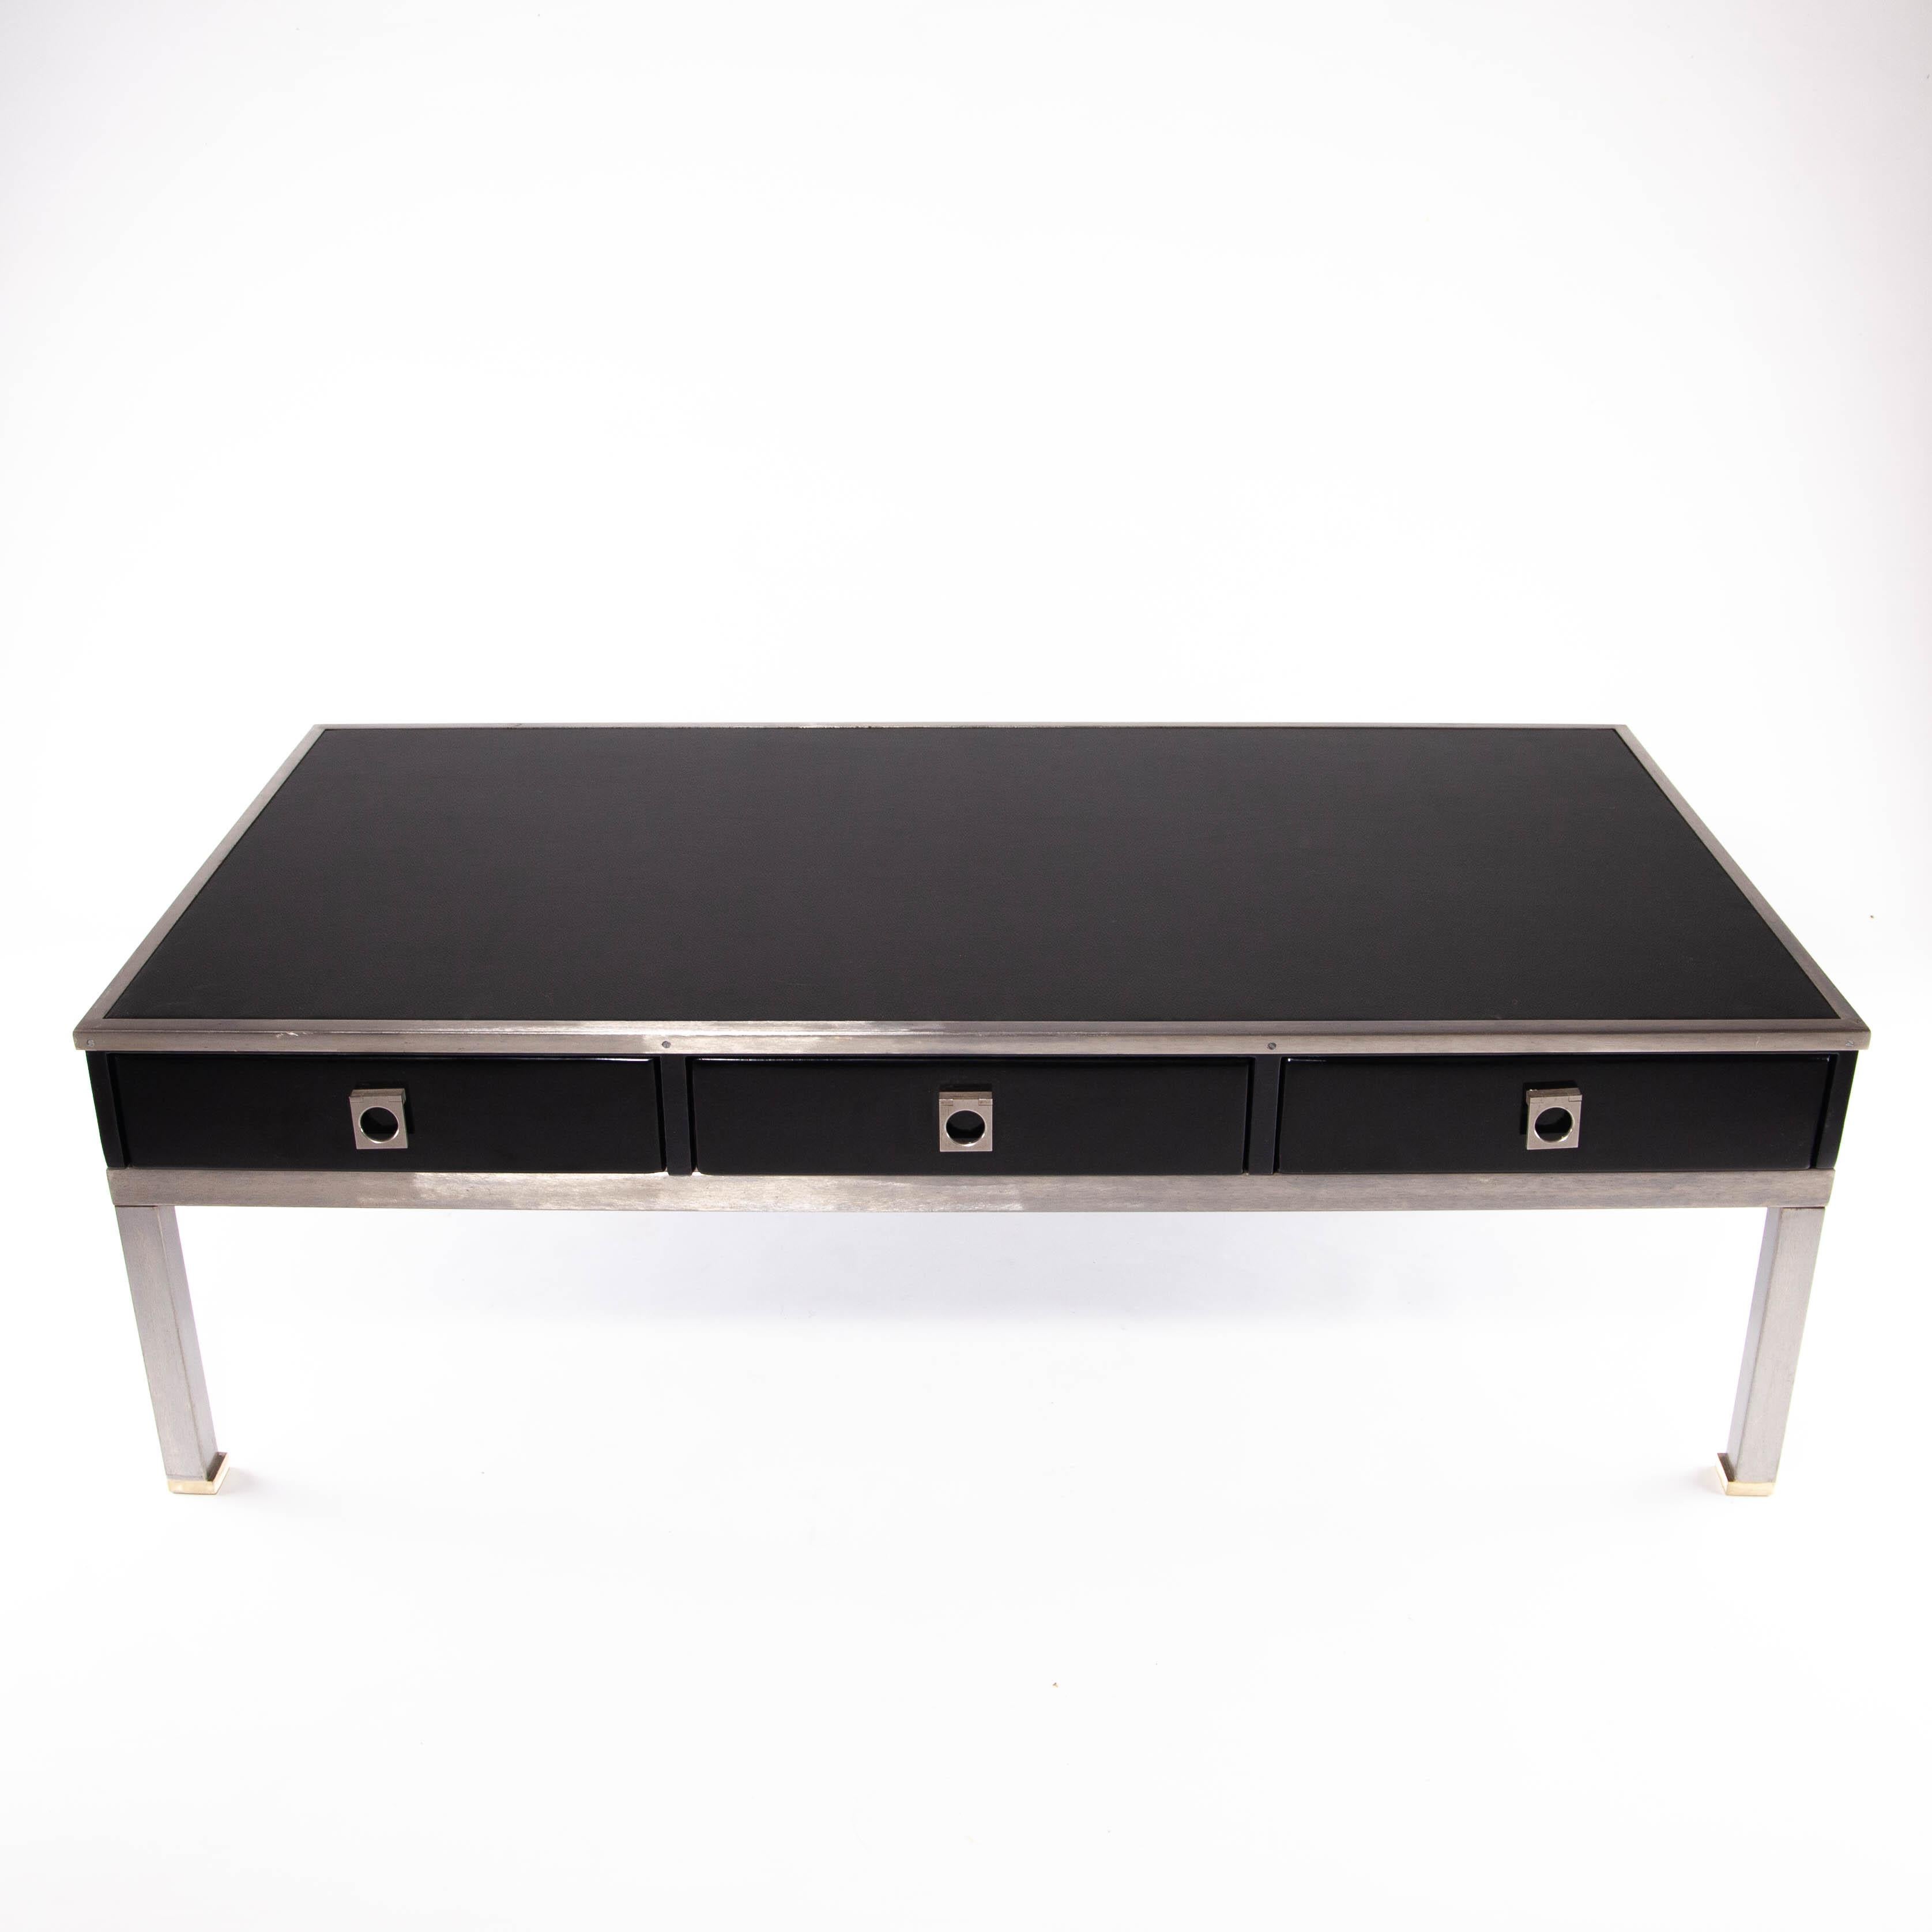 Mid century Guy Lefevre coffee table completely restored. Faux leather top with 3 lacquered drawers. Brushed steel legs with a little touch of gold at the lowest part. Probably edited by Maison Jansen